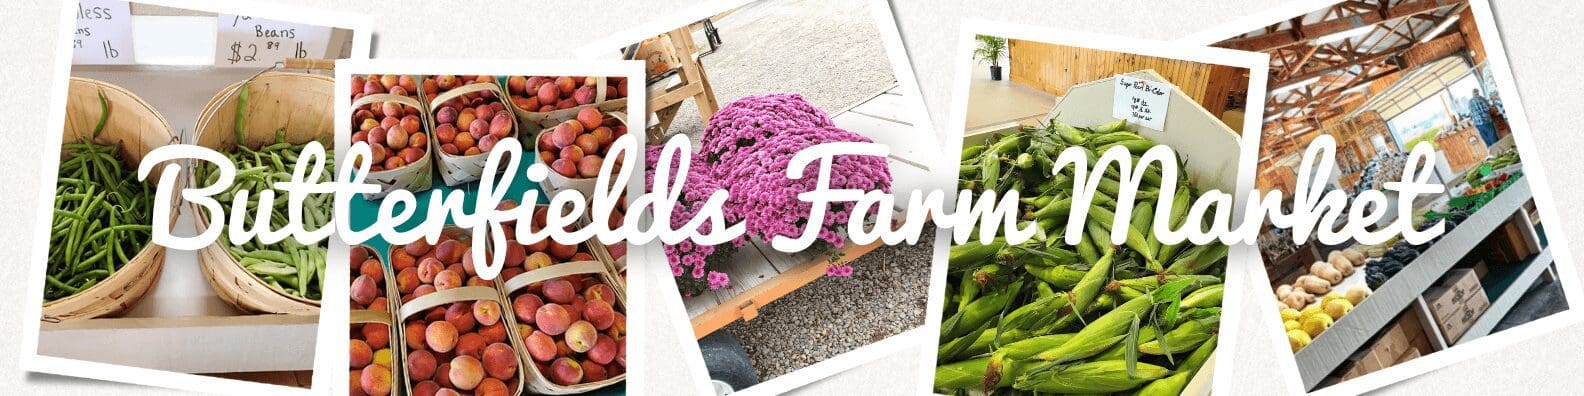 Collage of green beans, peaches, flowers, corn, and the market